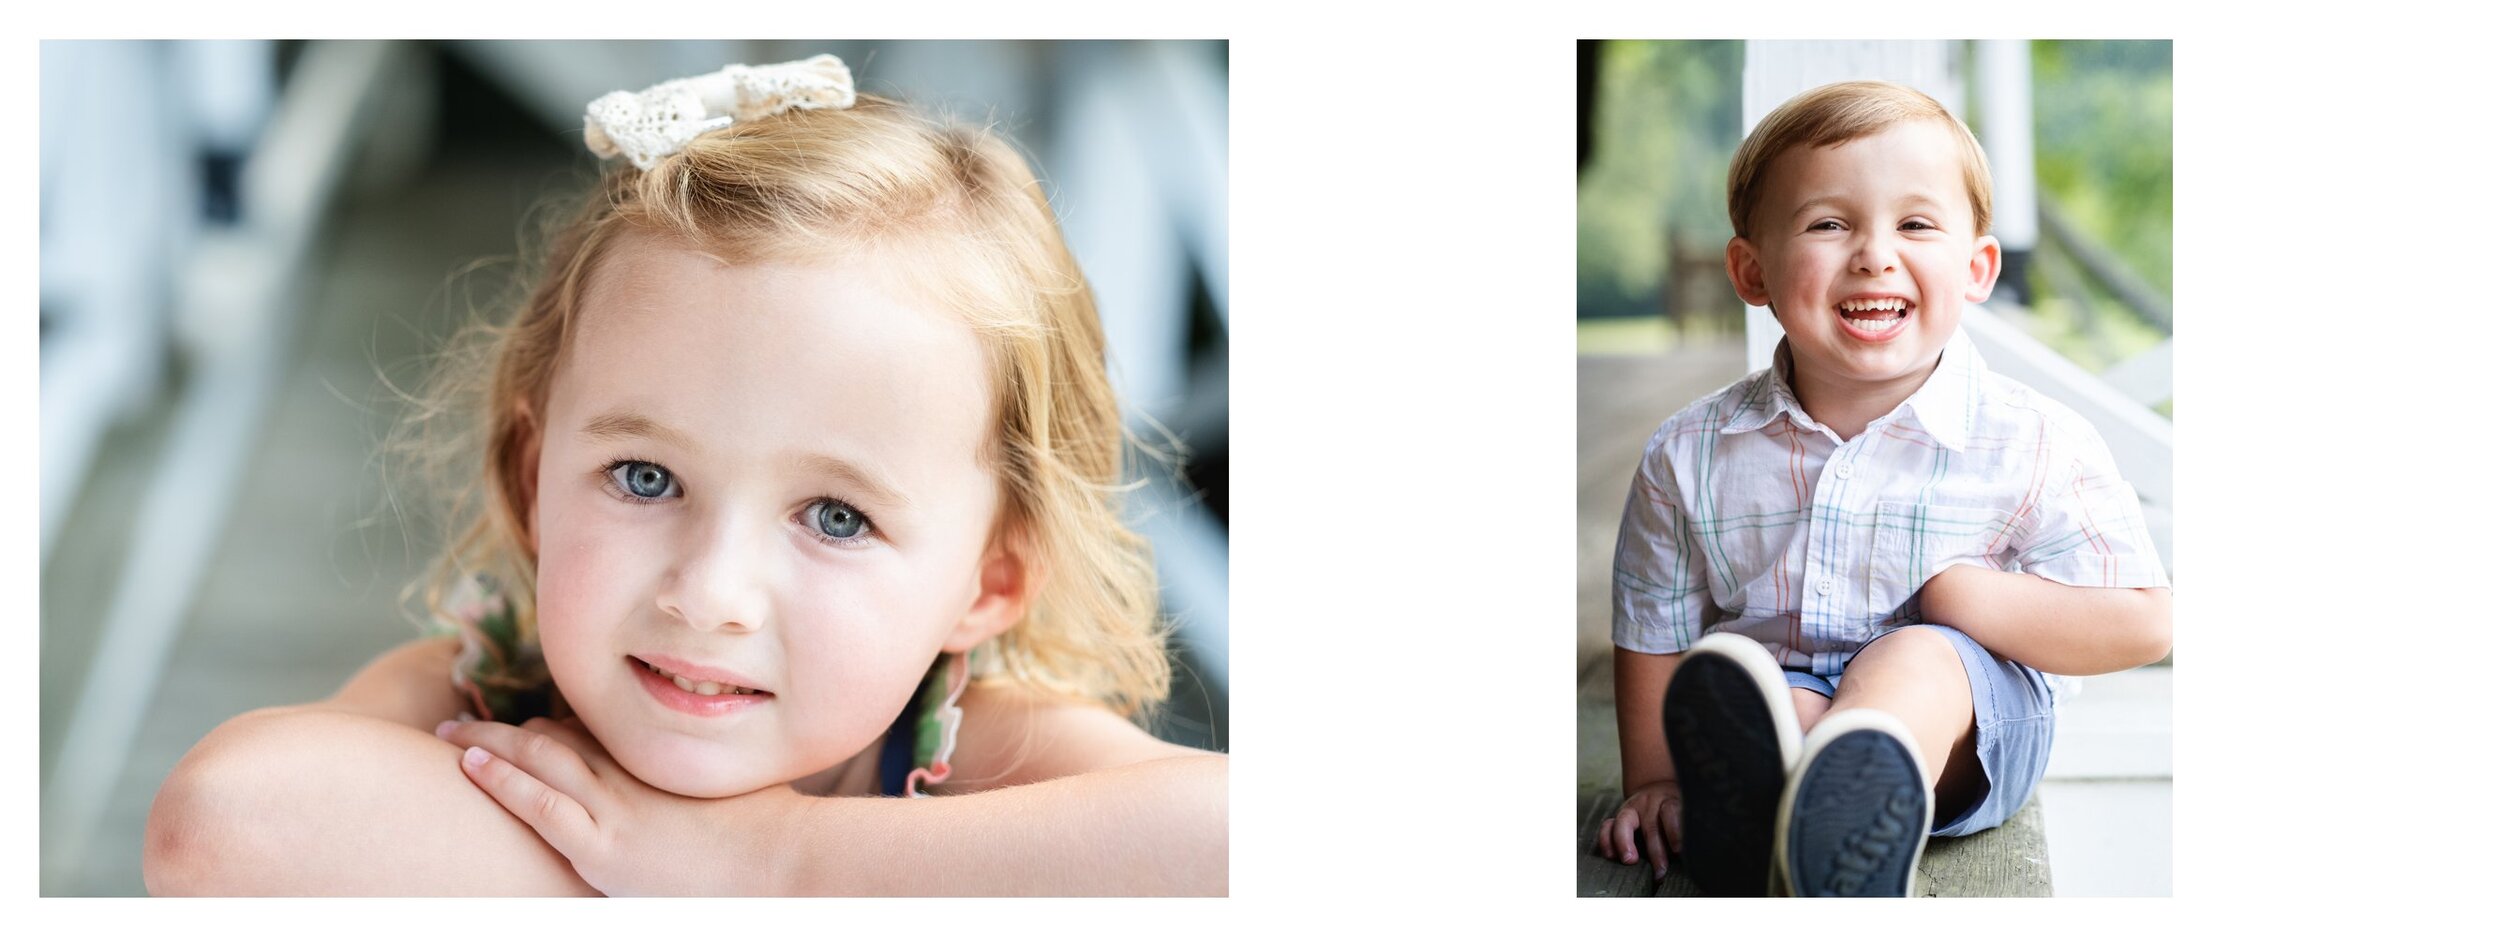 portraits_of_brother_and_Sister_annapolis_md.jpg